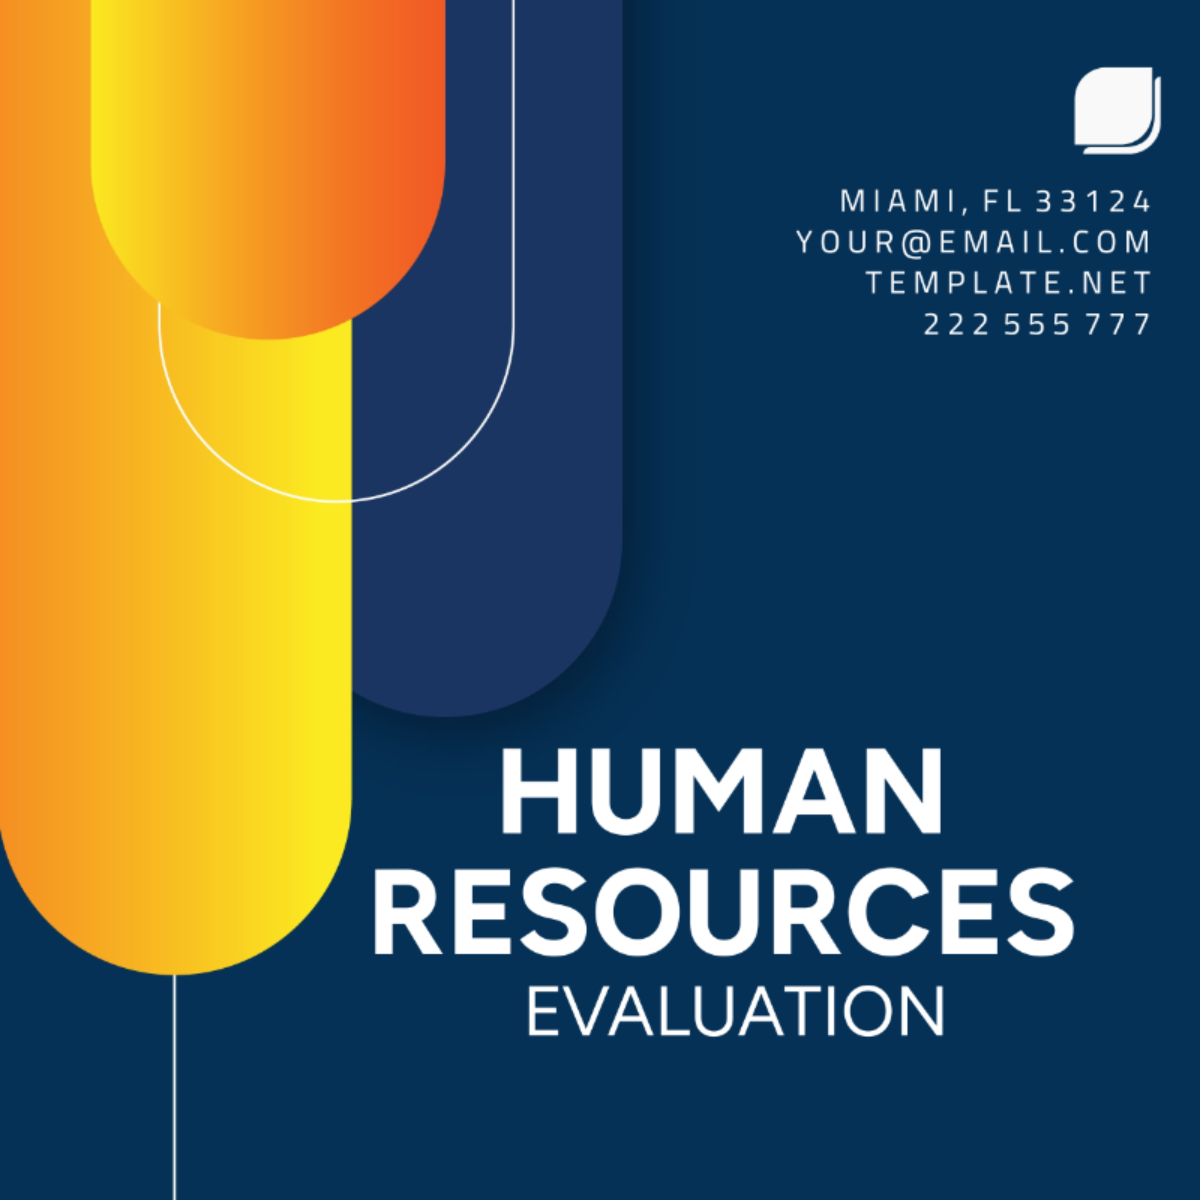 Human Resources Evaluation Template